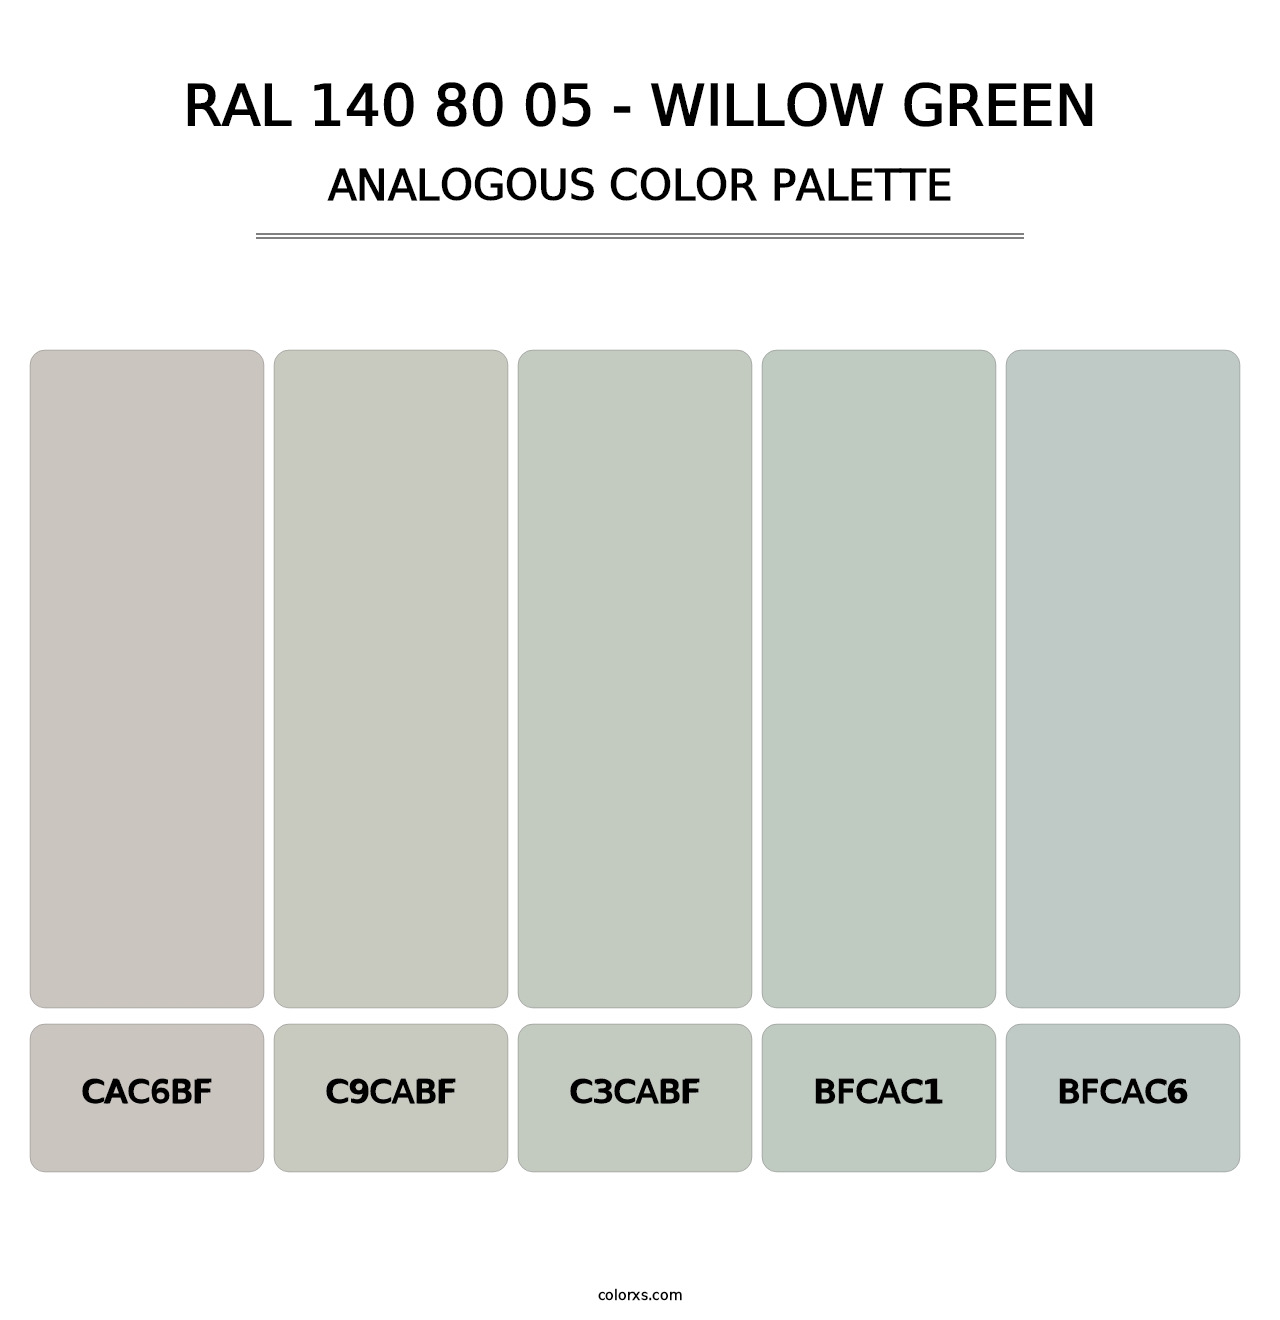 RAL 140 80 05 - Willow Green - Analogous Color Palette